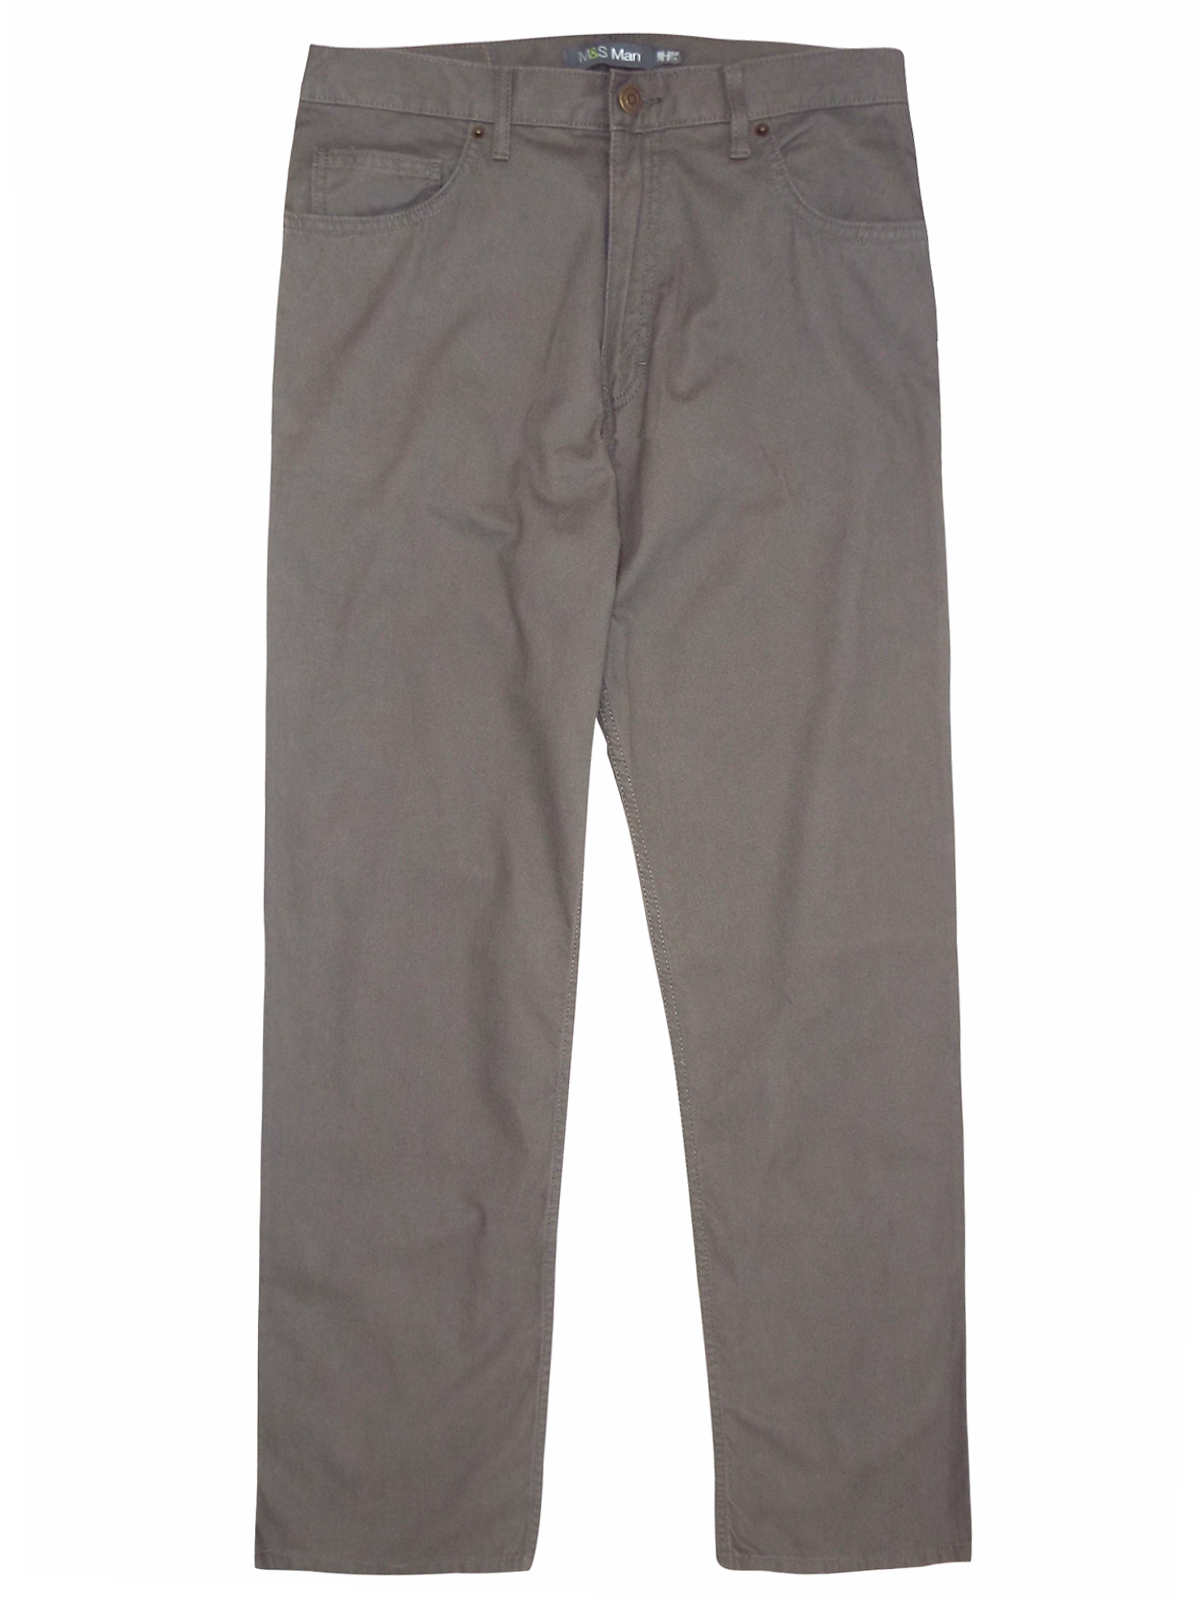 Marks and Spencer - - M&5 MOLE Pure Cotton Chinos - Waist Size 34 to 36 ...